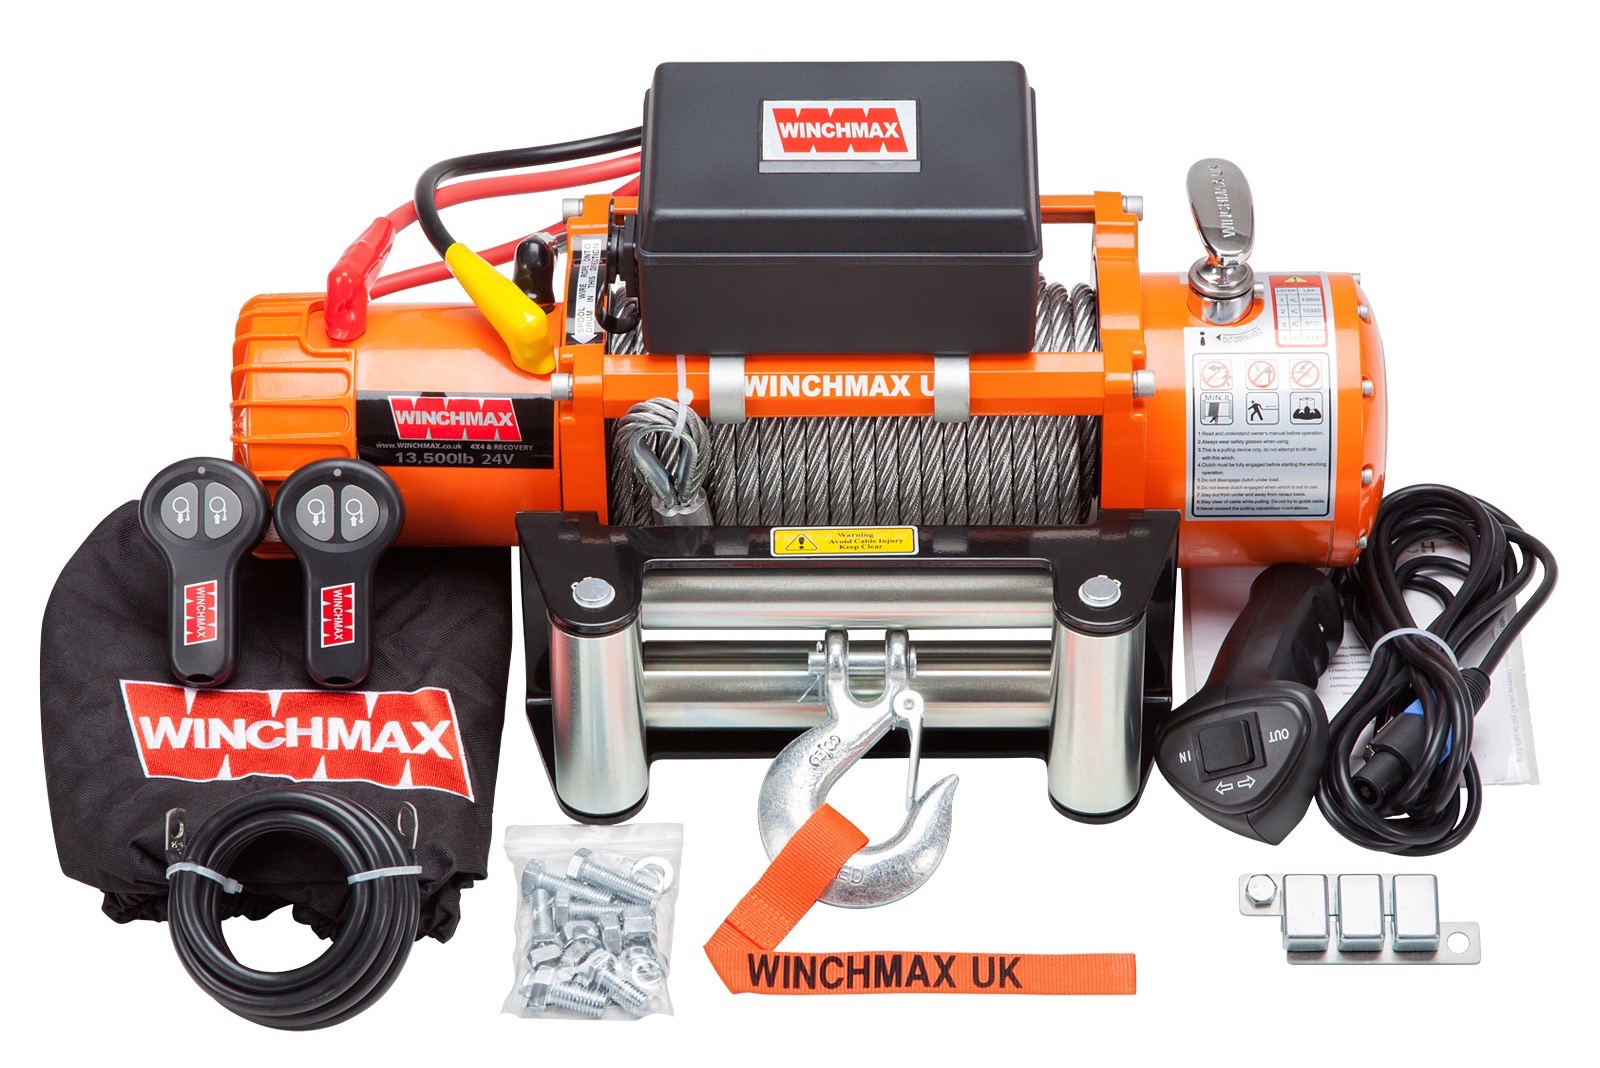 WINCHMAX 24V 13500LB STEEL CABLE RECOVERY WINCH 